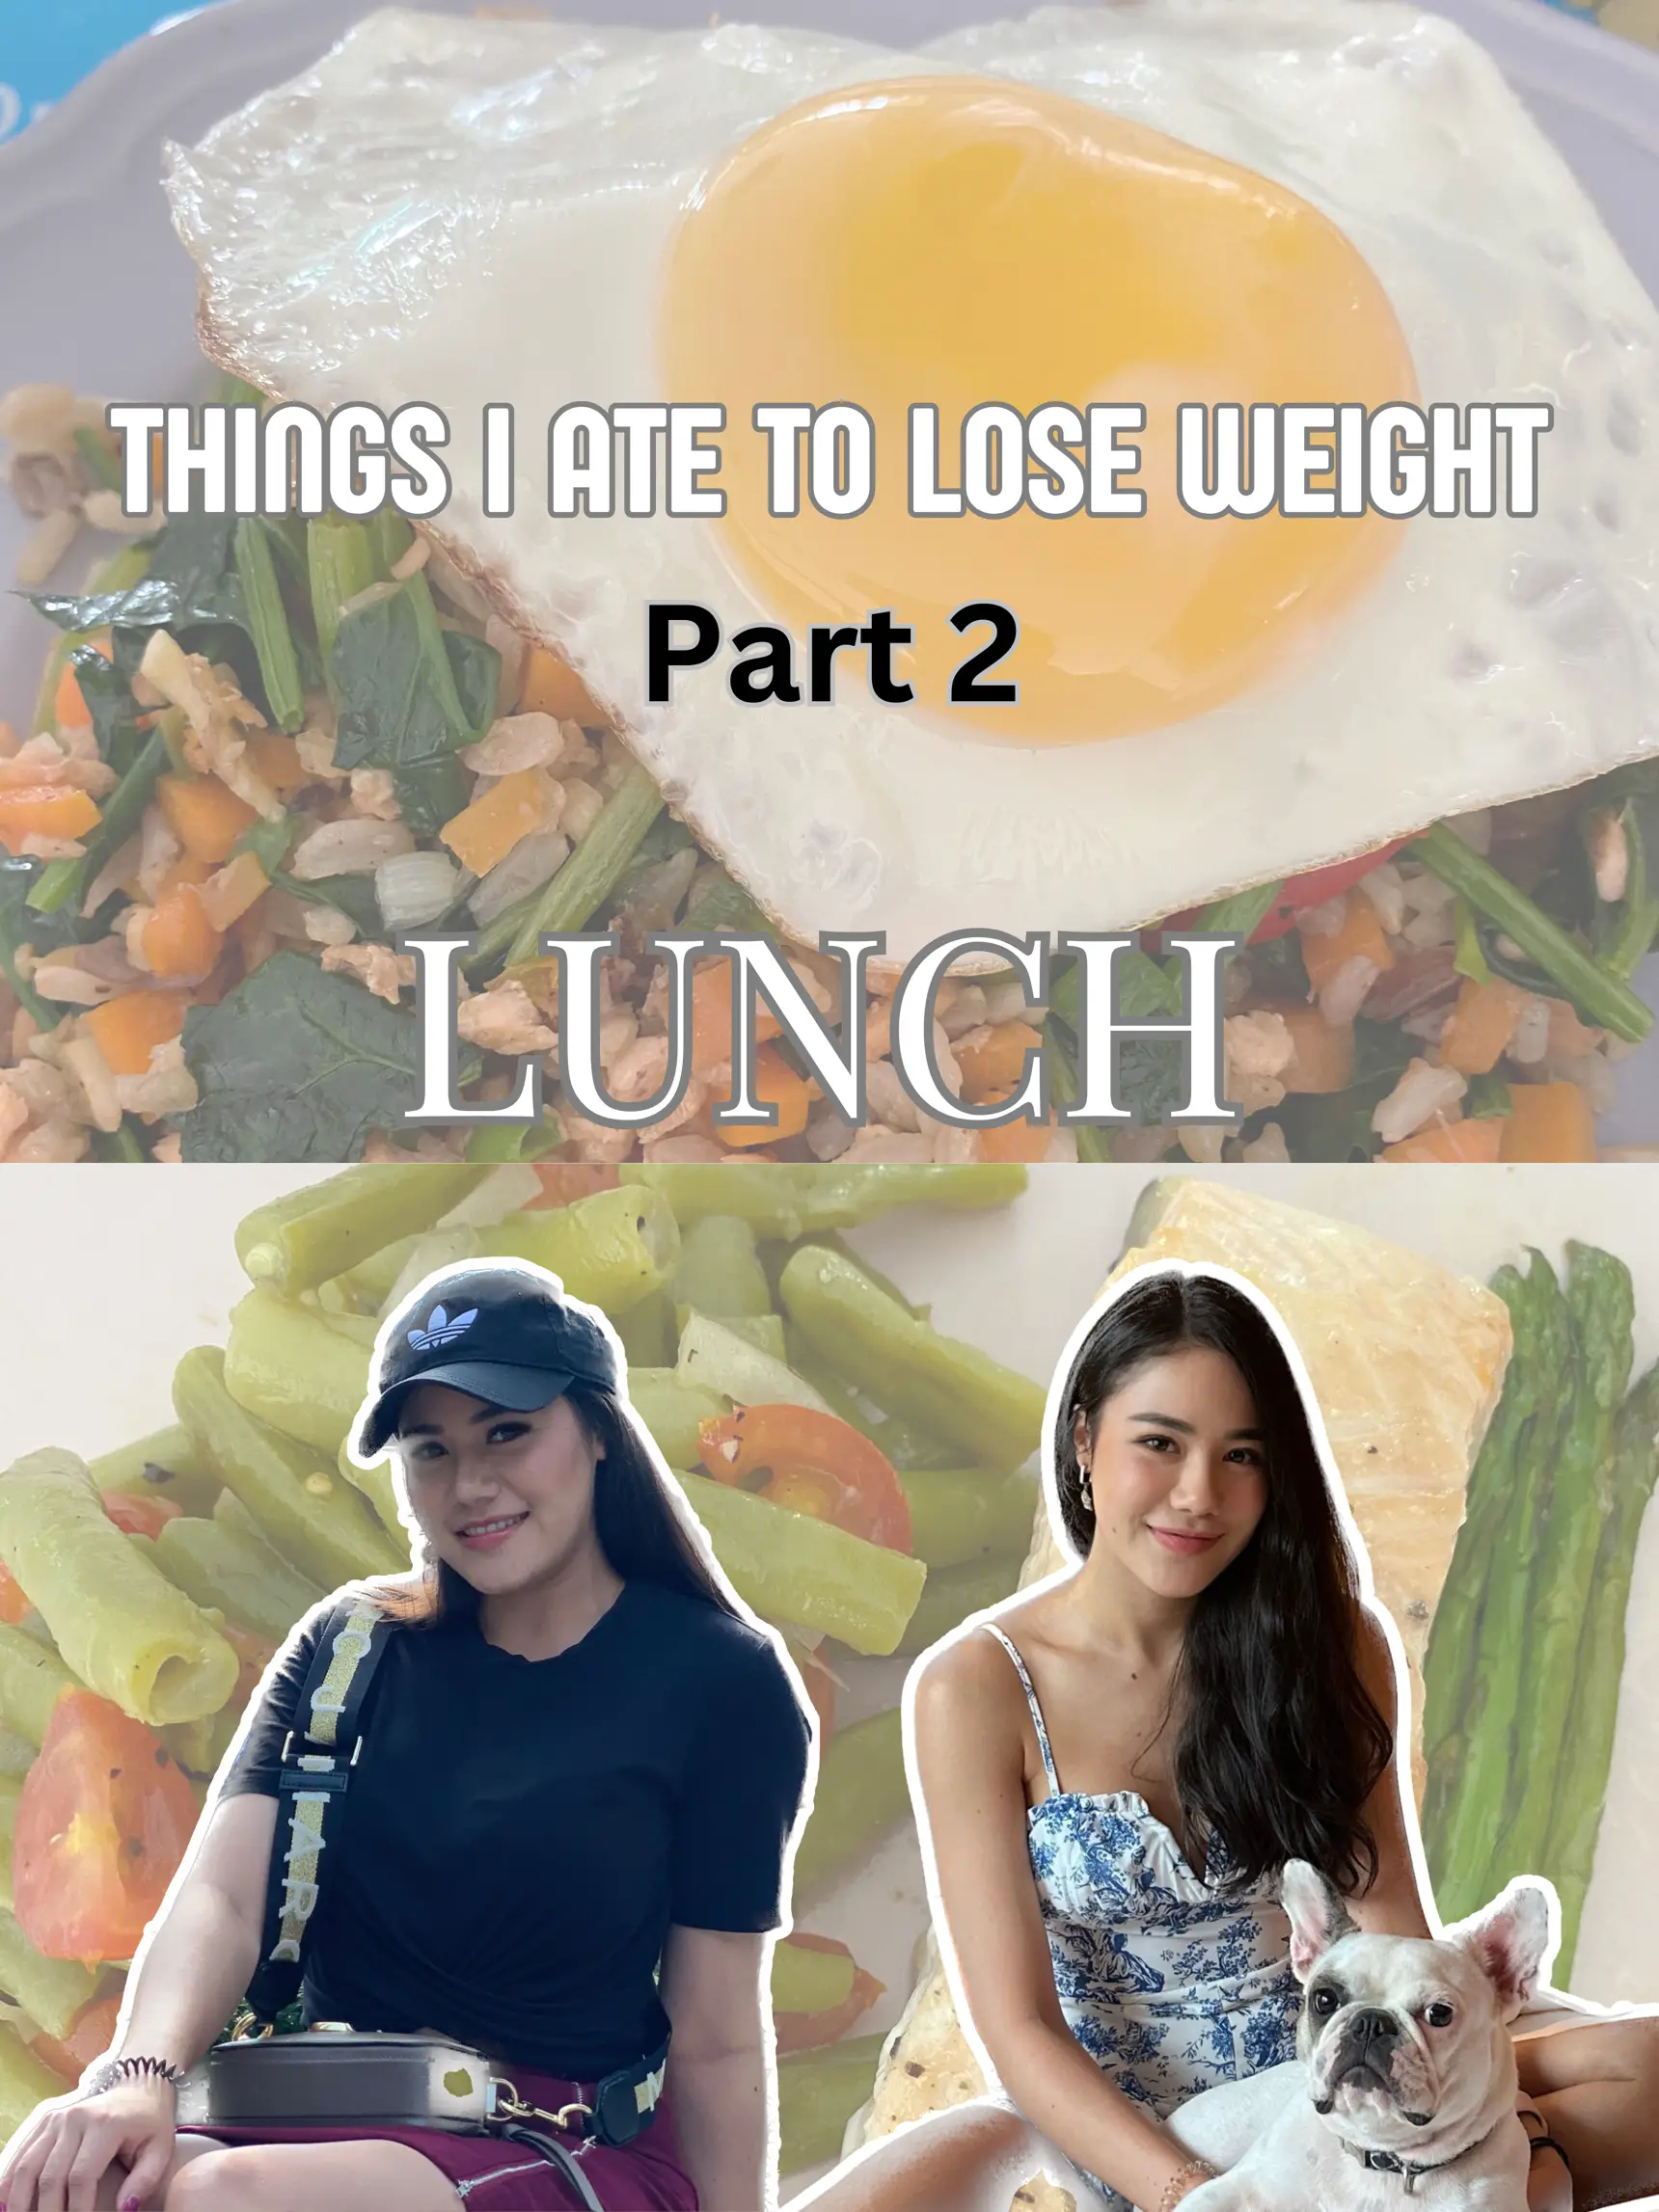 Easy lunch recipes that helped me lose 8kg 💪🏻's images(0)